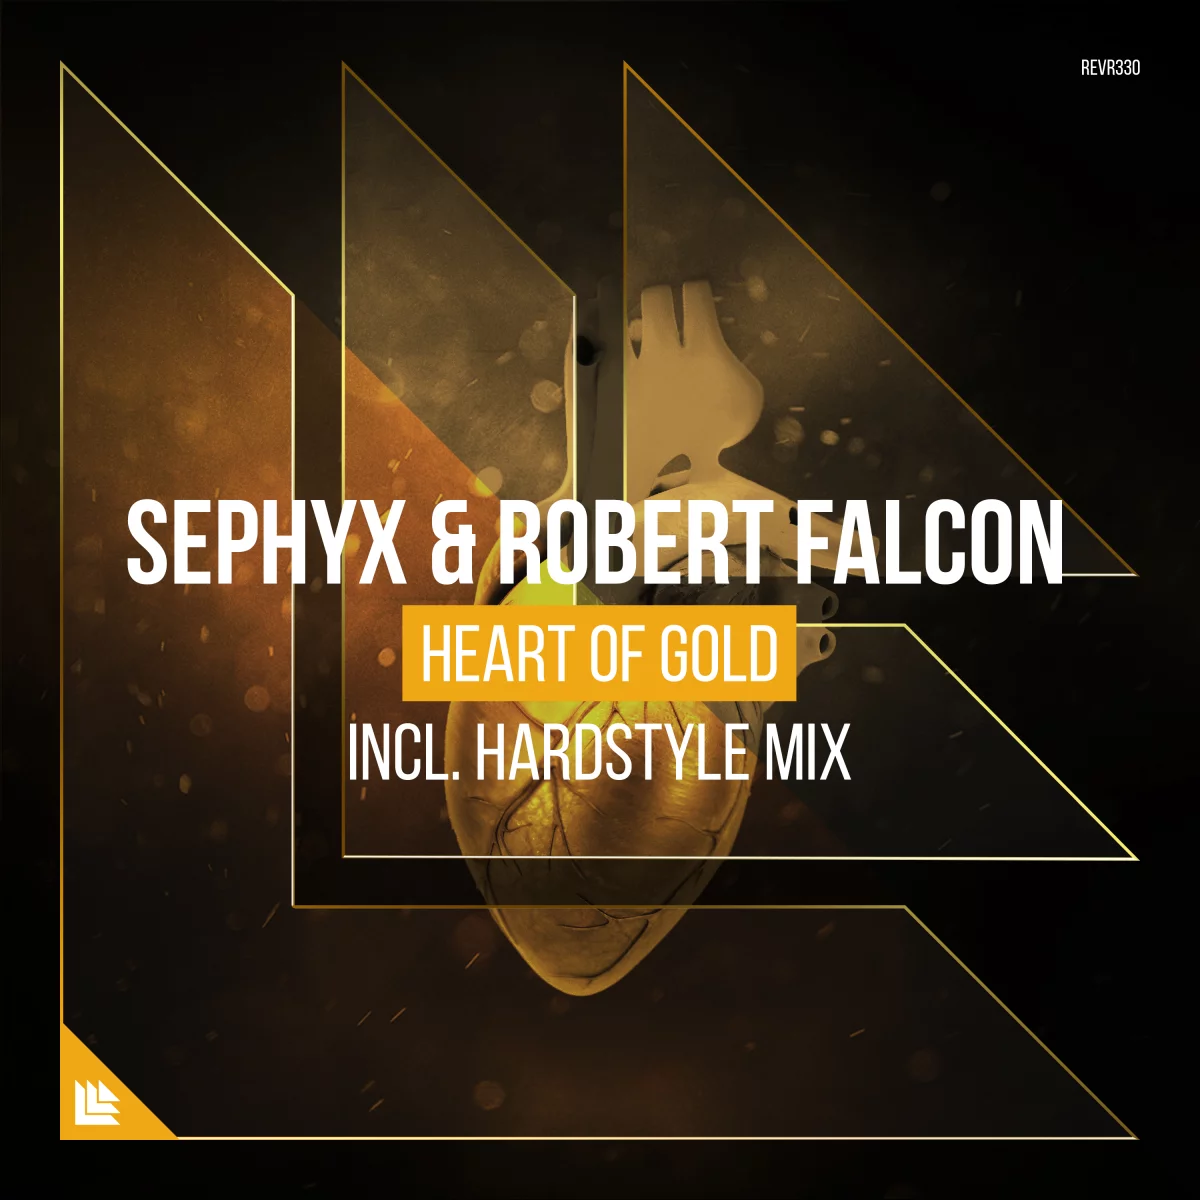 Heart Of Gold (Incl. Hardstyle Mix) - Sephyx & Robert Falcon